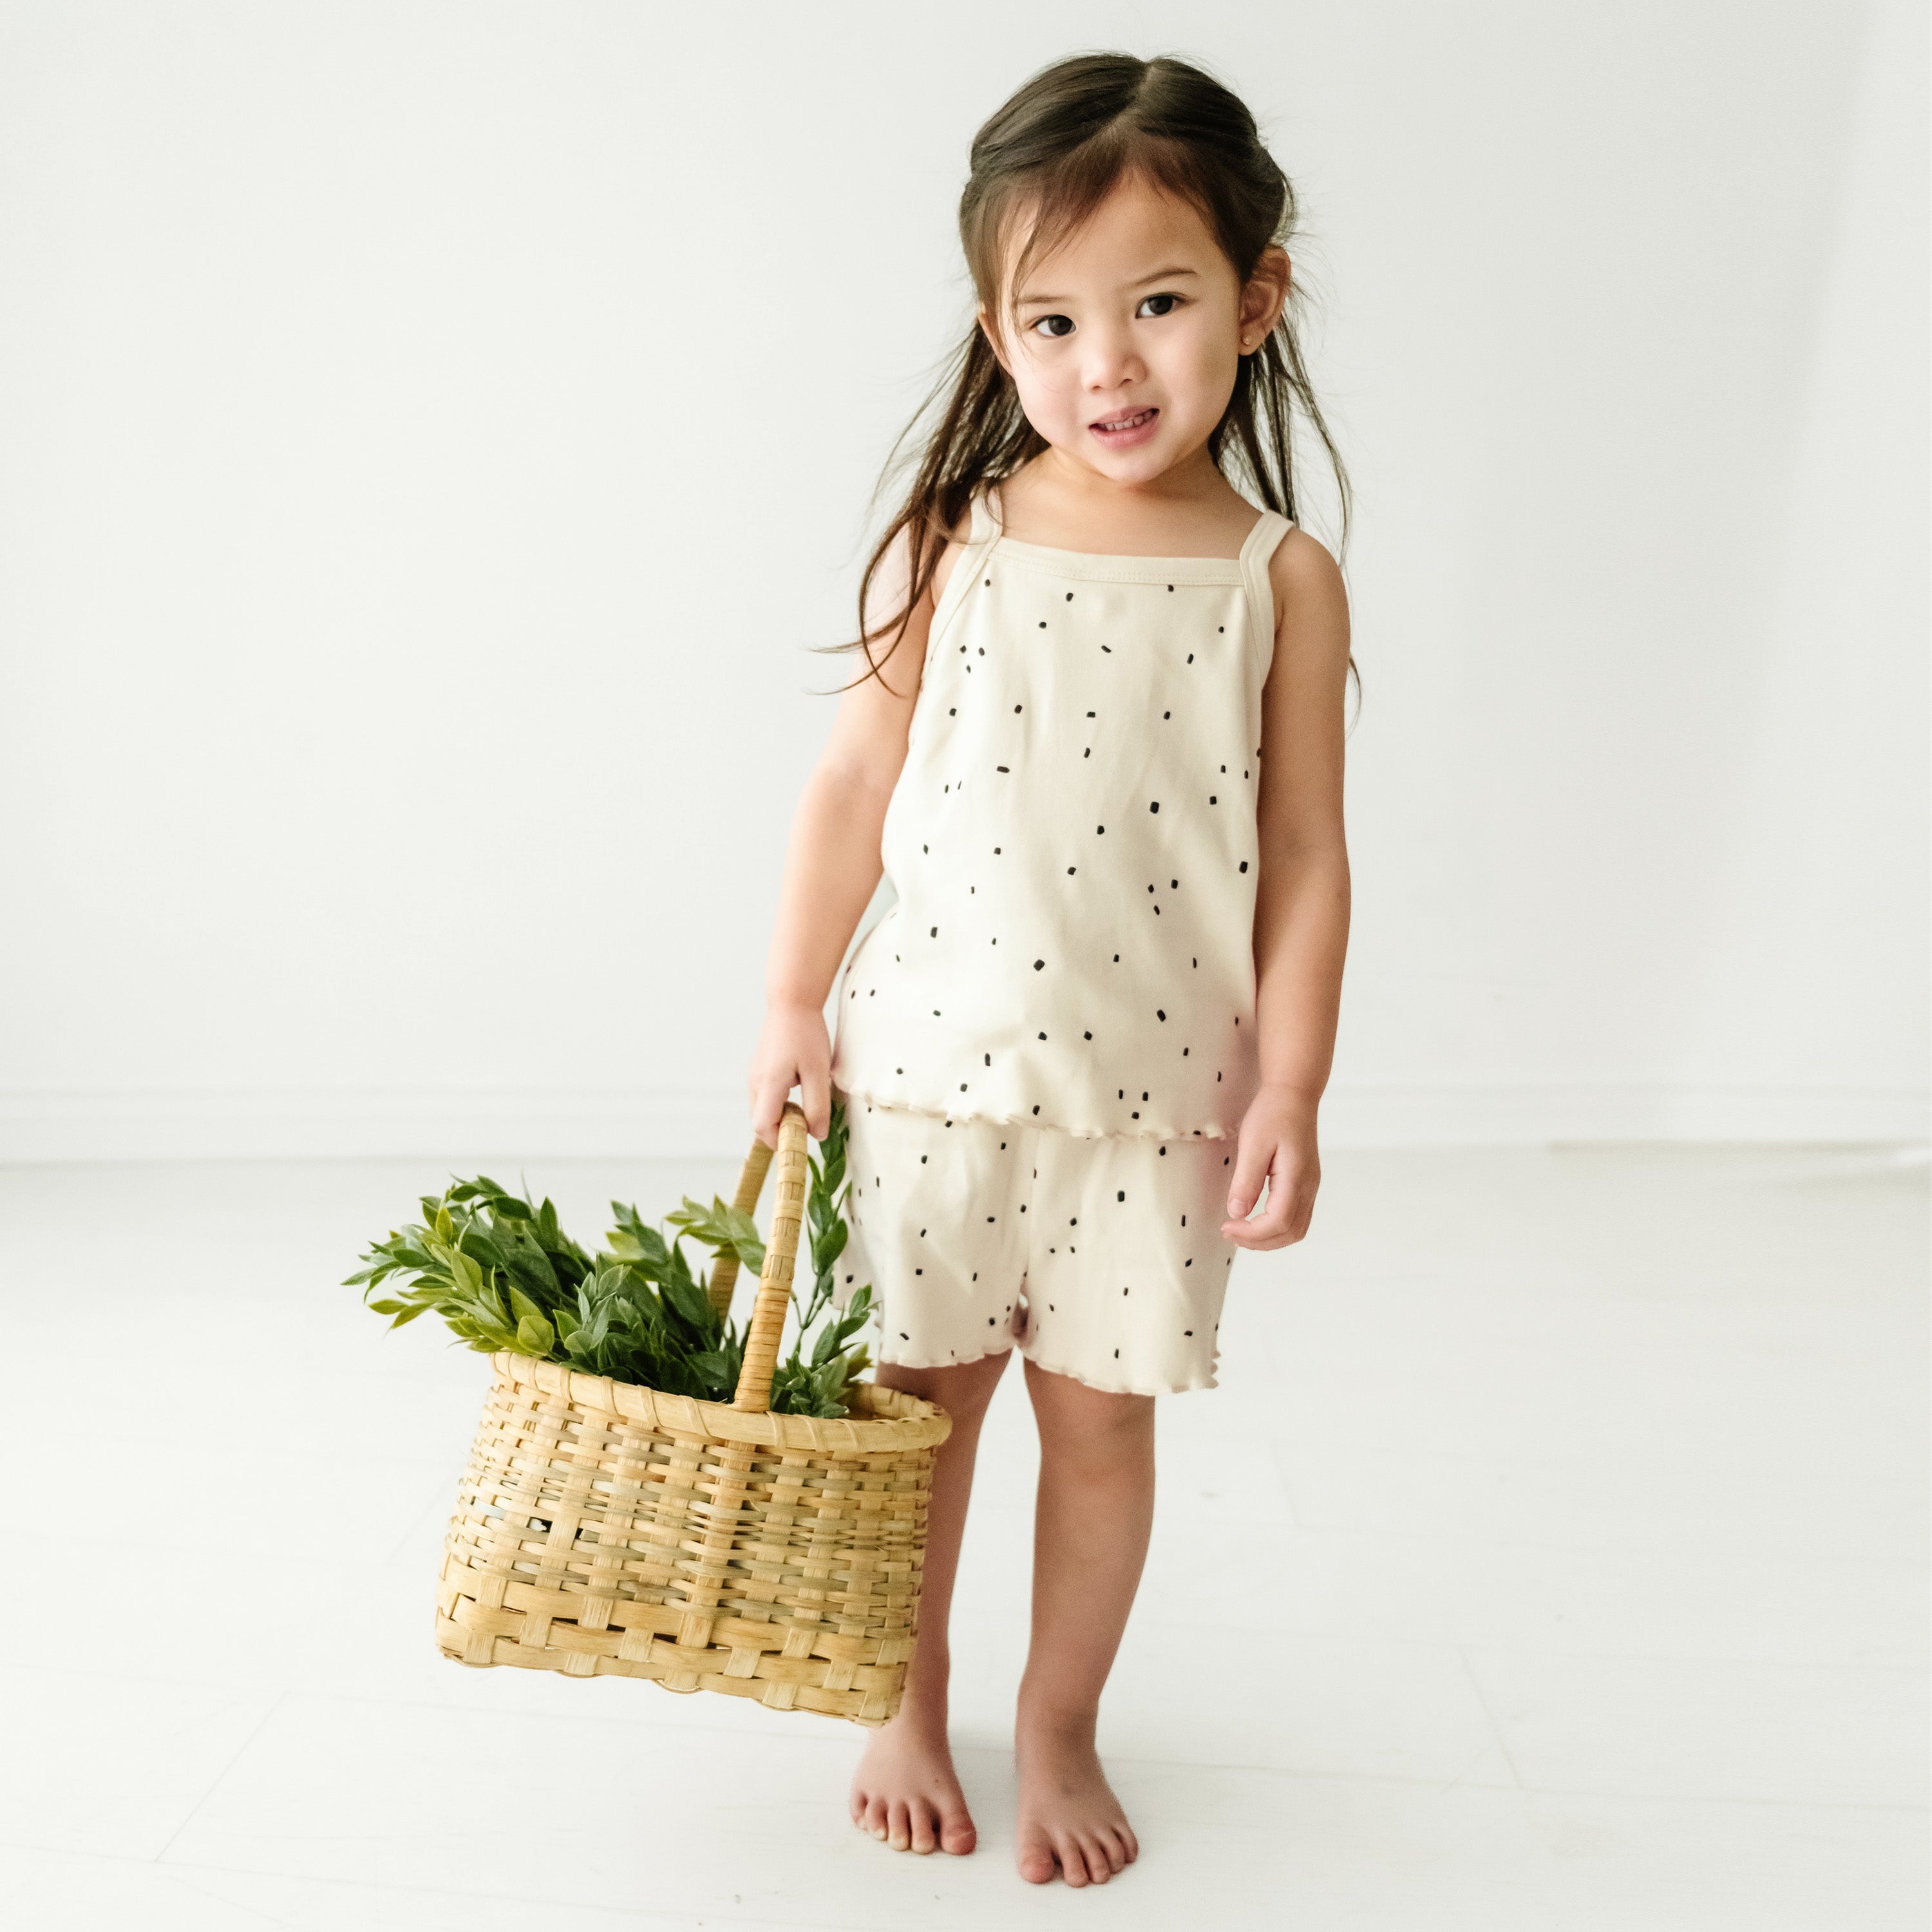 A toddler in a Organic Spaghetti Top & Shorts Set - Pixie Dots by Makemake Organics holds a woven basket filled with fresh green vegetables, standing against a white background, looking happy.